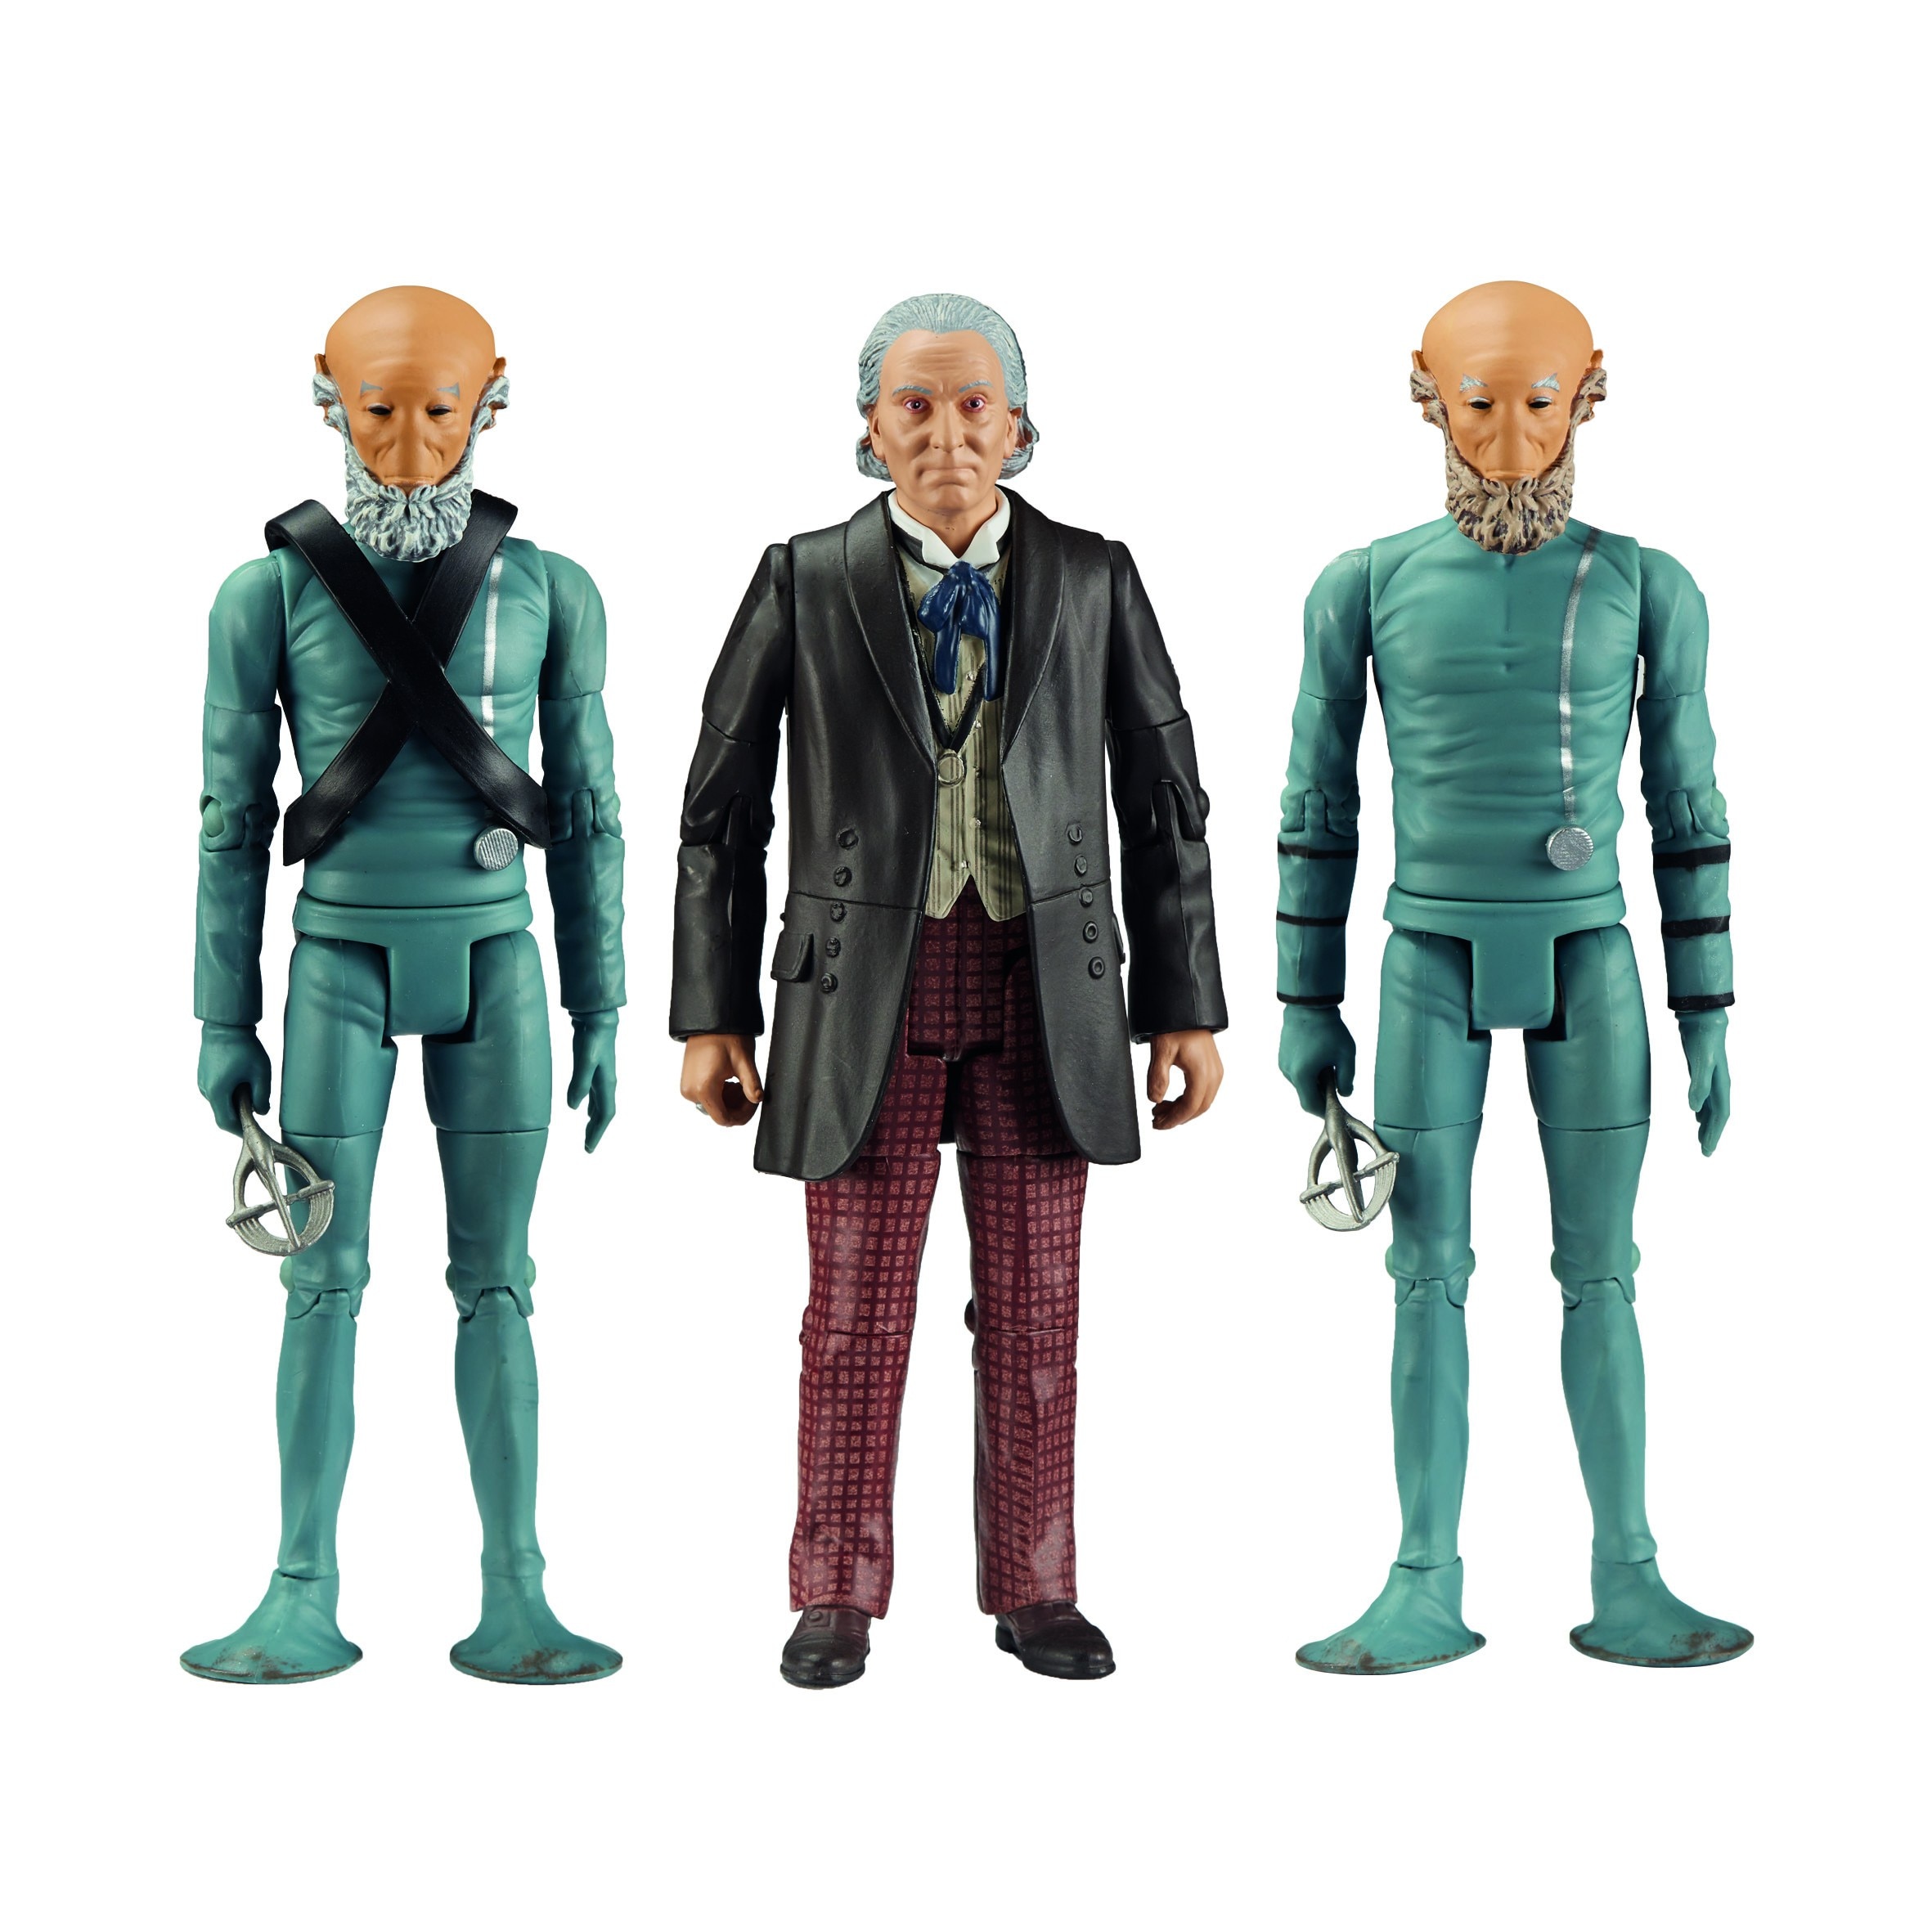 Coming soon, the First Doctor and his villains, plus two Dalek